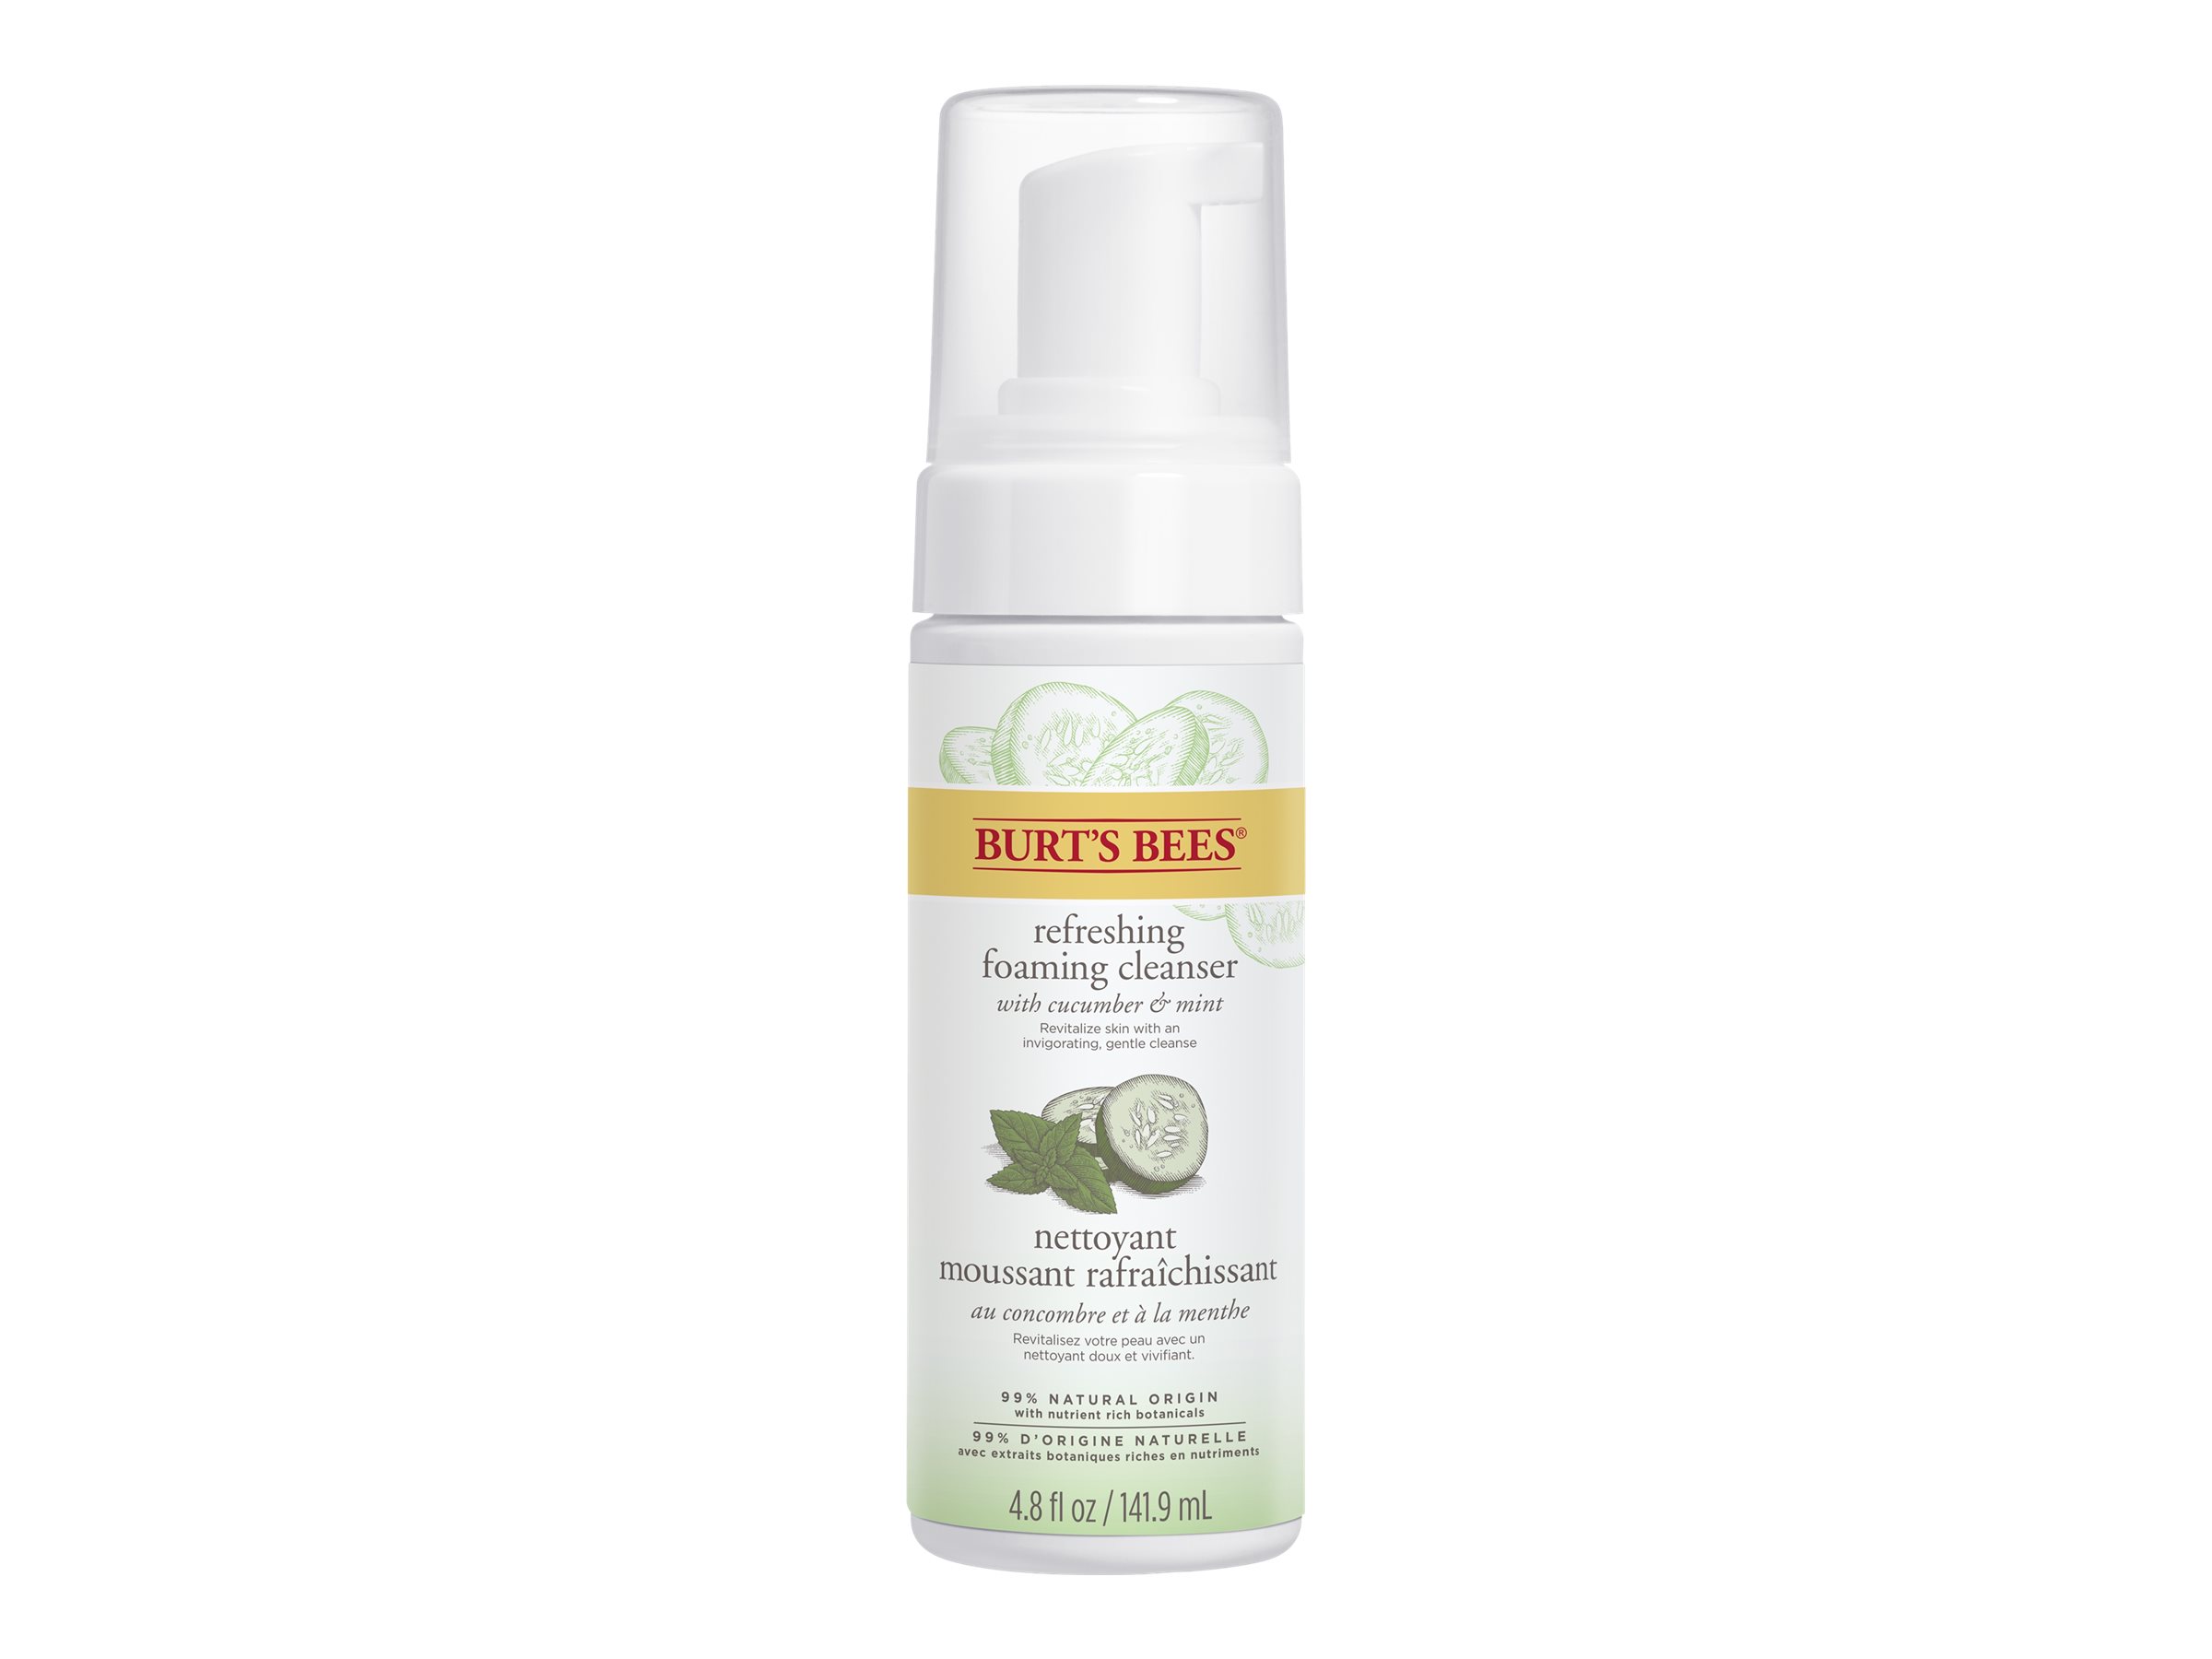 Burt's Bees Refreshing Foaming Cleanser - Cucumber and Mint - 141.9ml